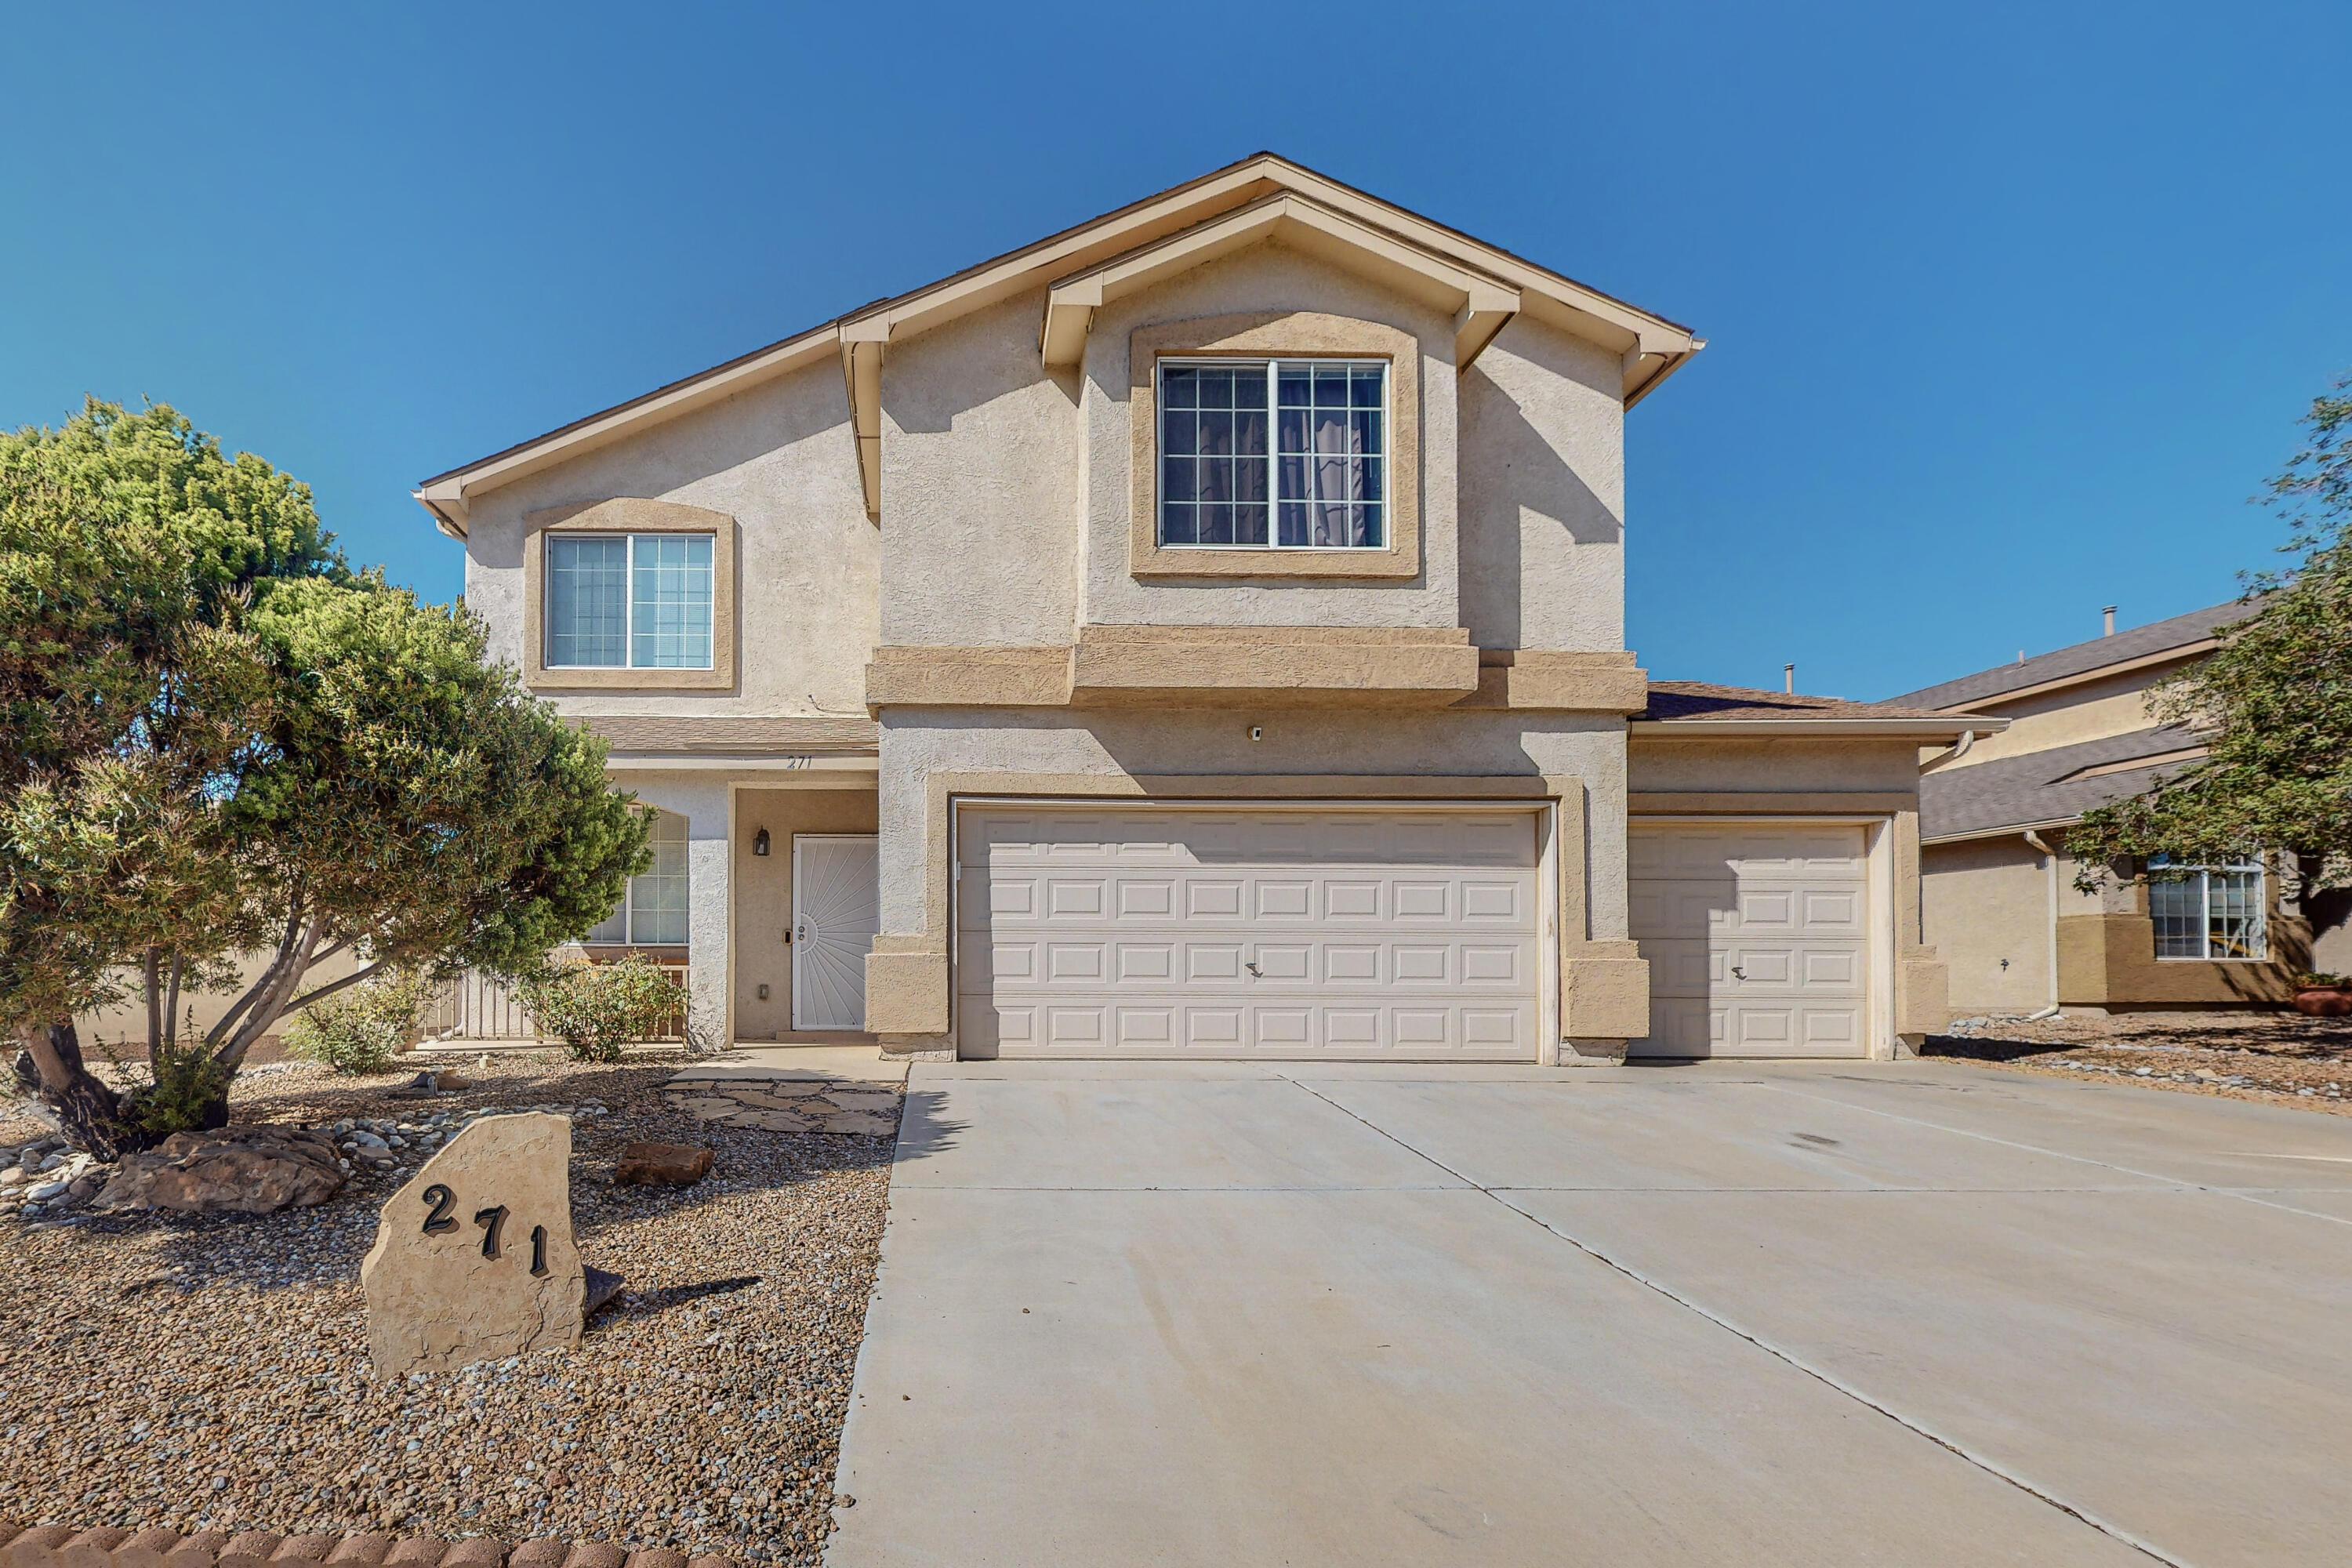 This Los Lunas home has a great floor plan including two living spaces and a large loft! The large backyard has artful custom features.Conveniently located near recreation and parks, with close access to I-25.